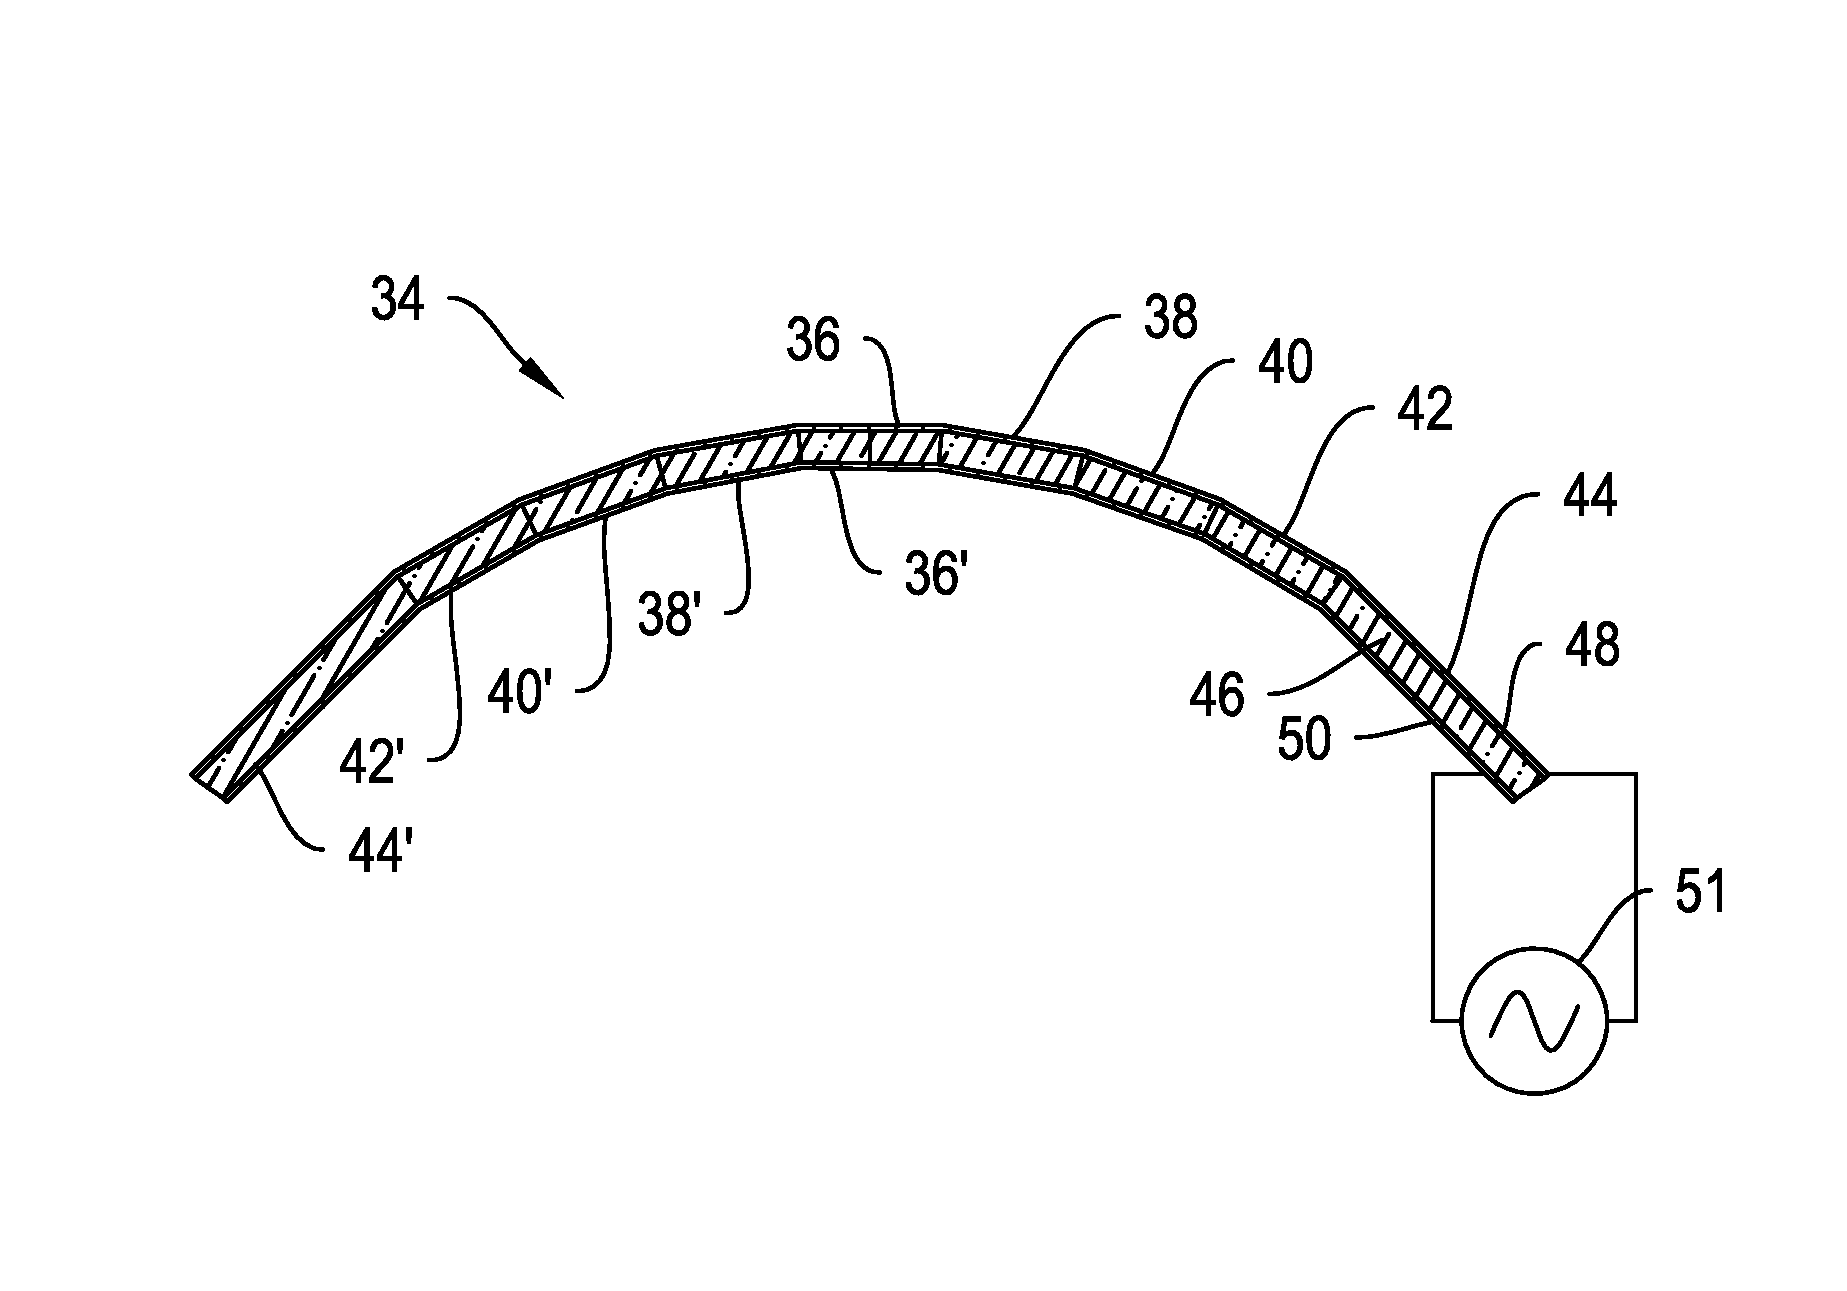 Method for designing an acoustic array